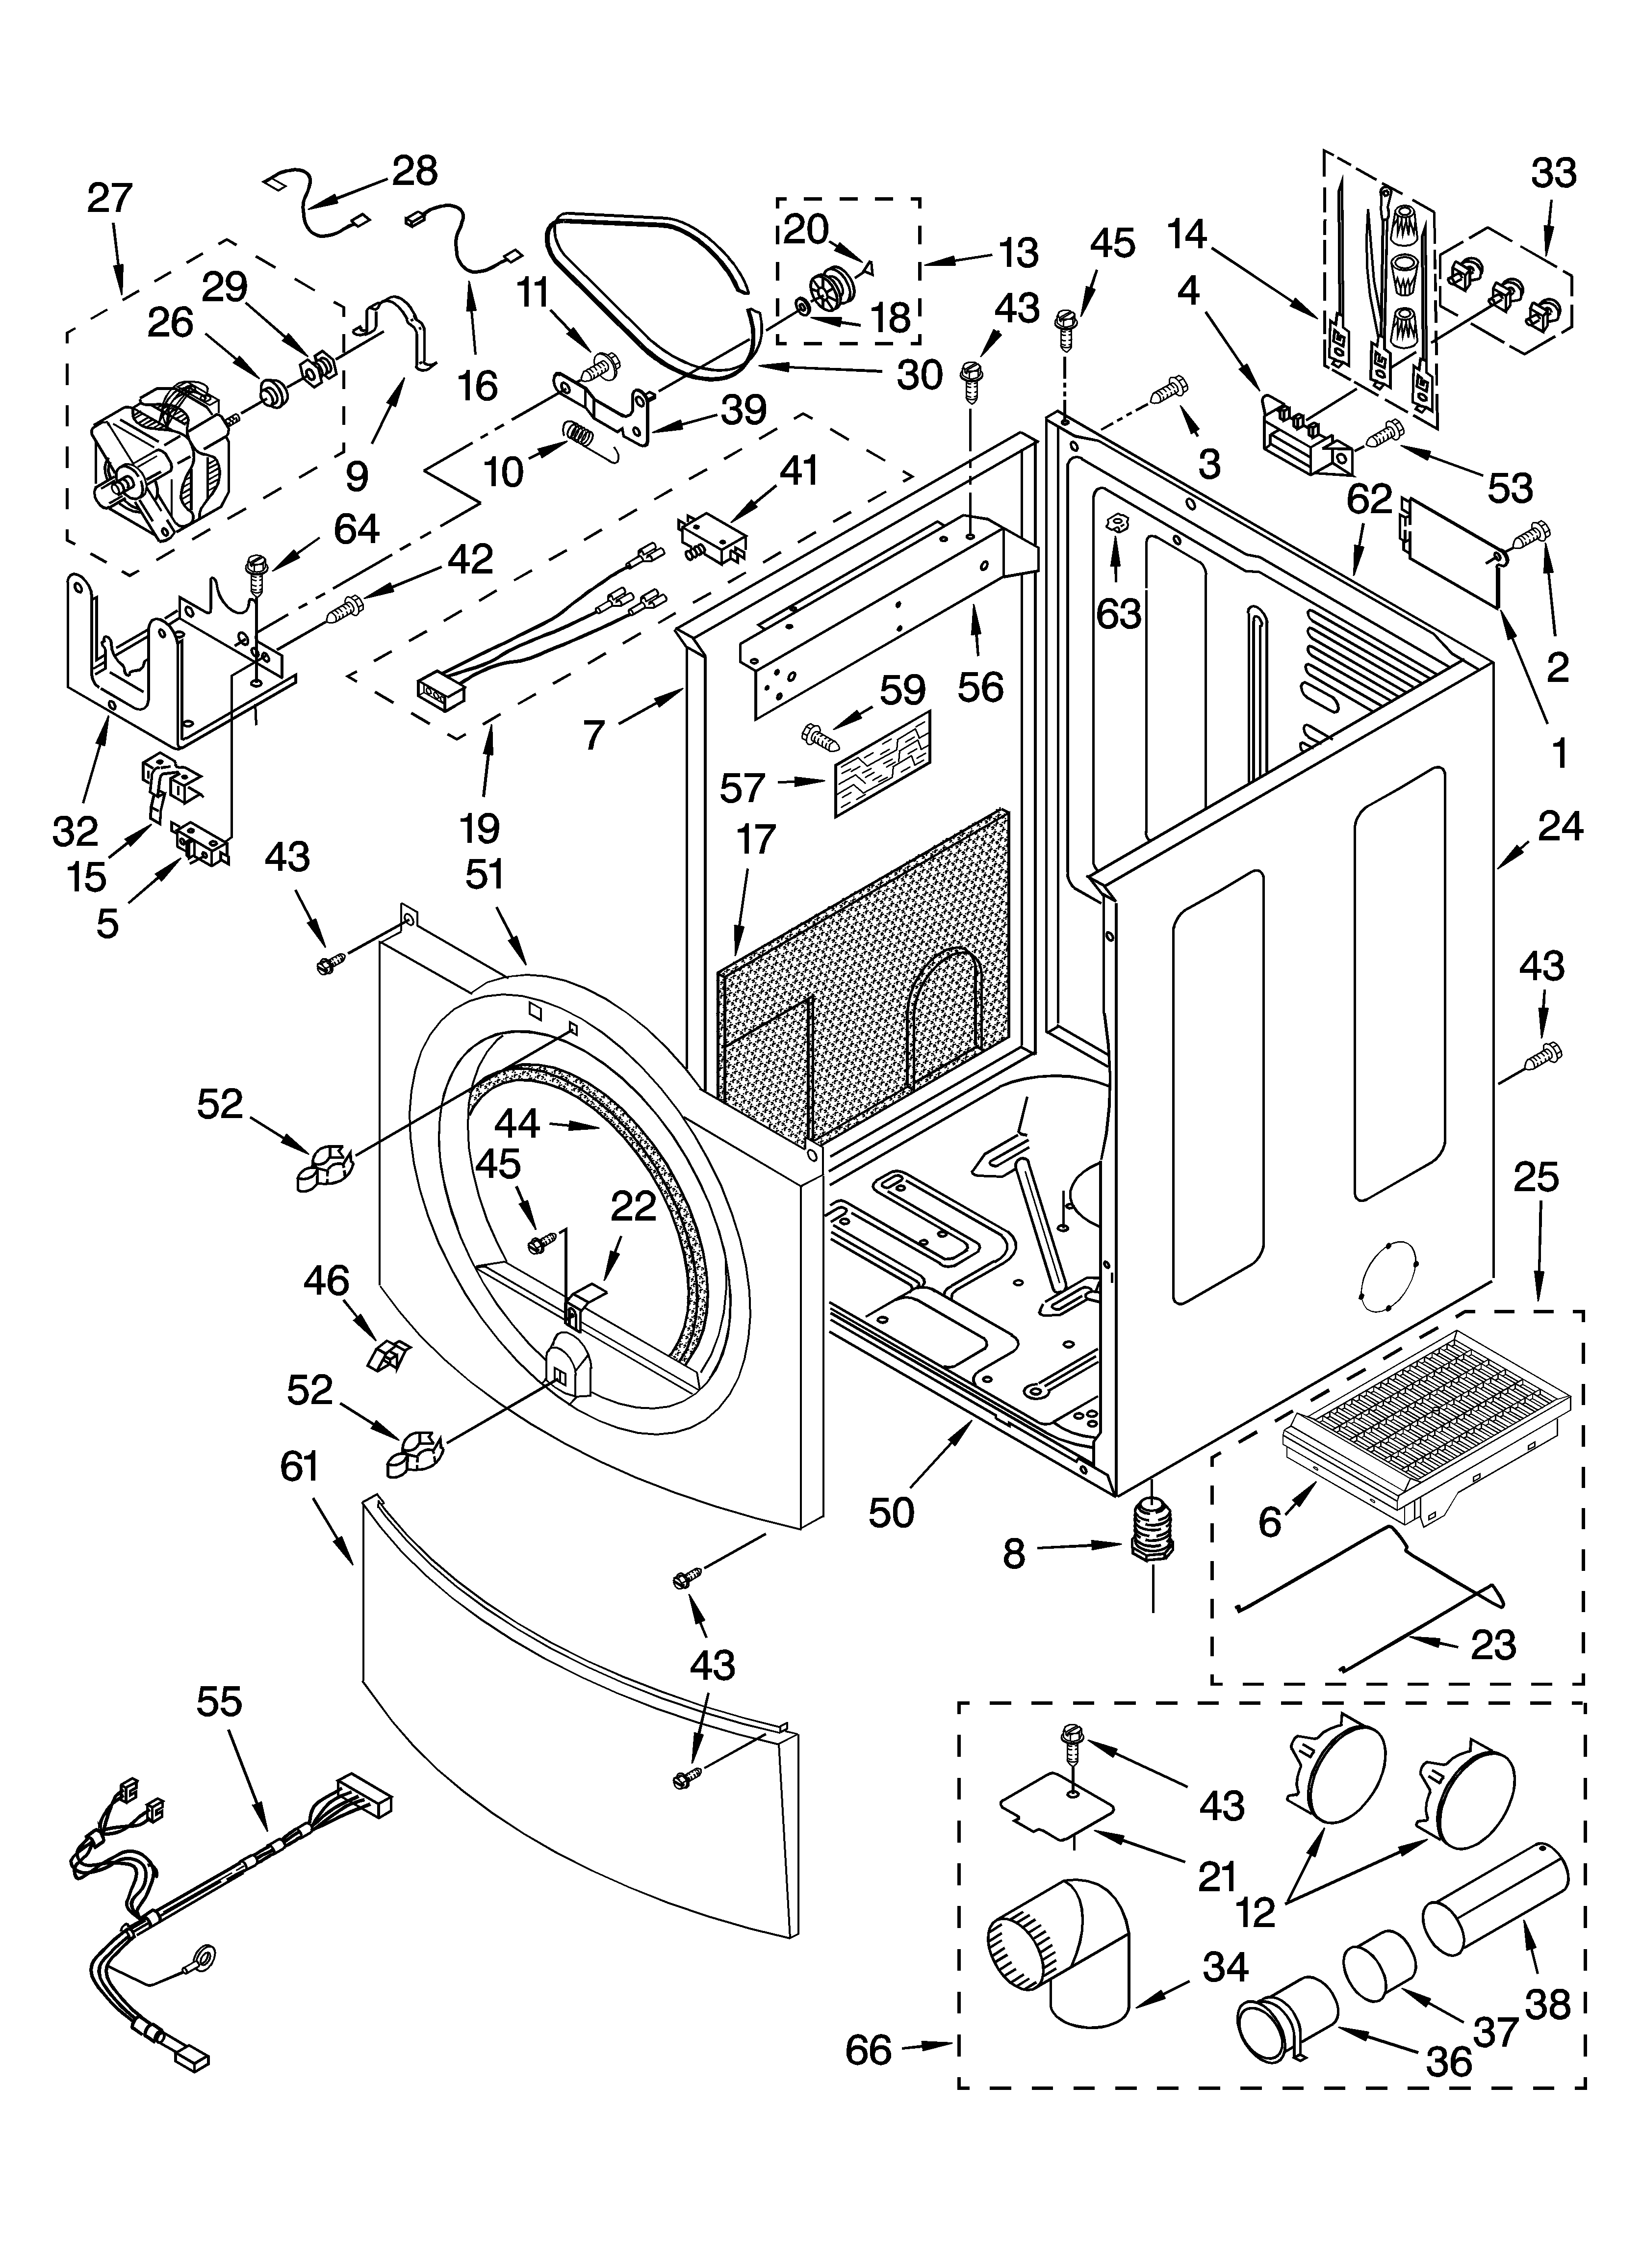 Wiring Diagram For Whirlpool Dryer Heating Element
